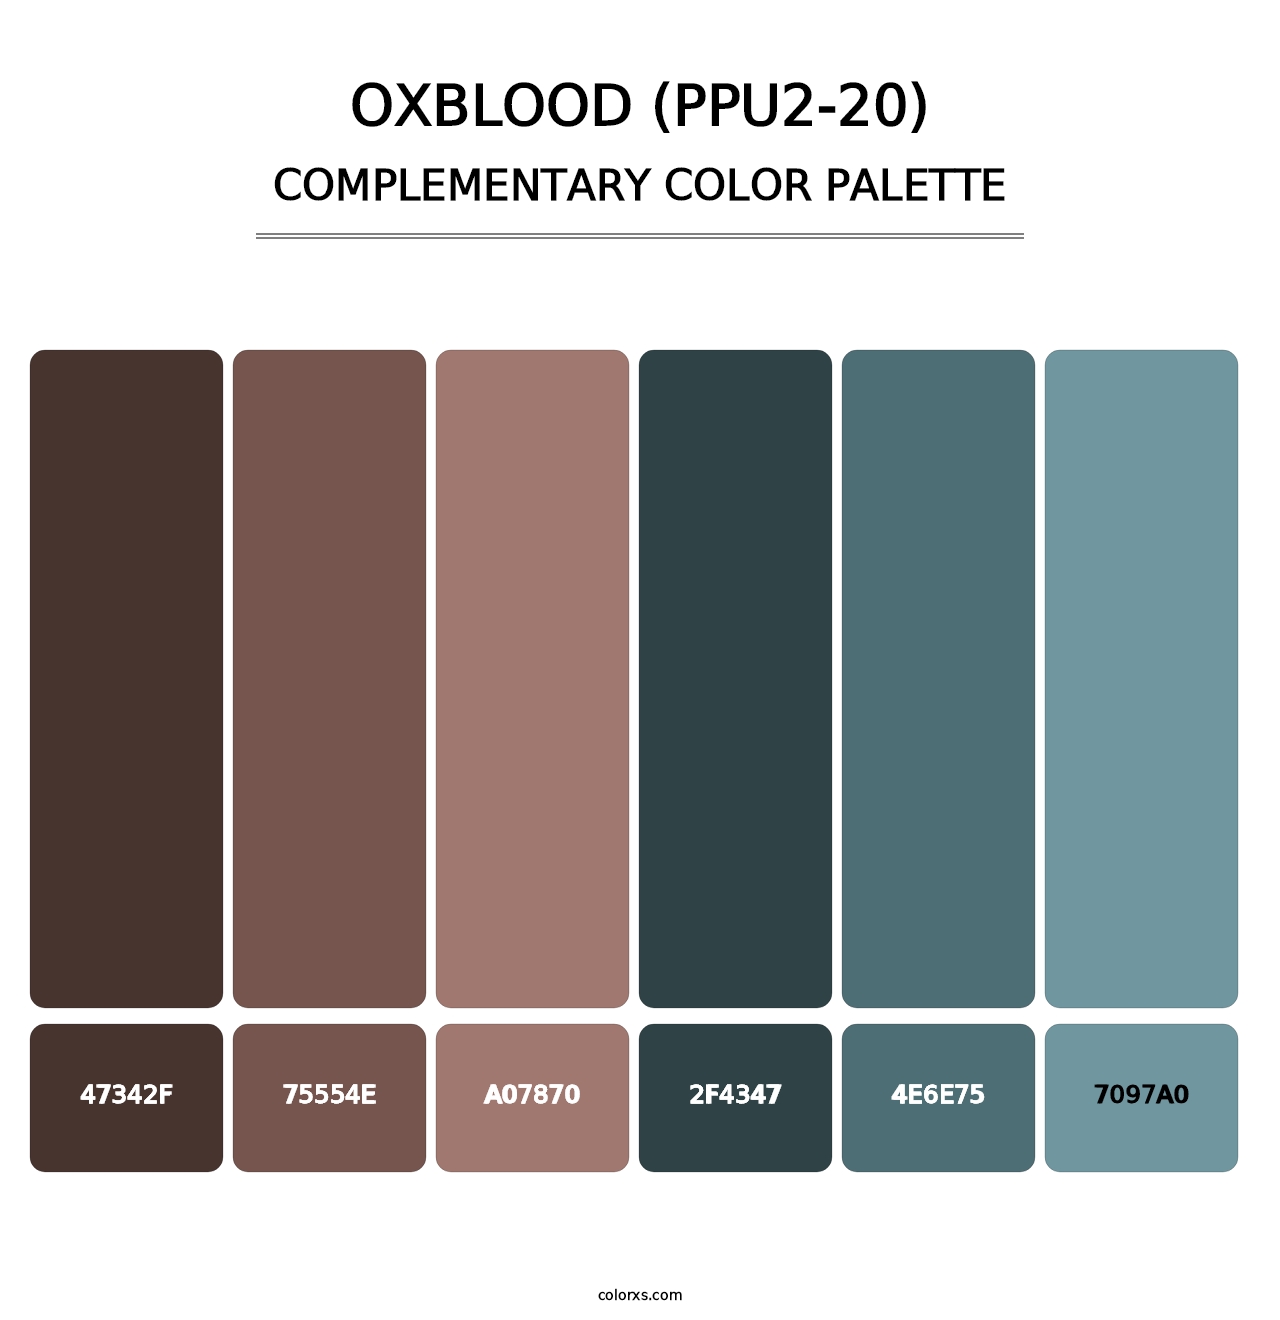 Oxblood (PPU2-20) - Complementary Color Palette